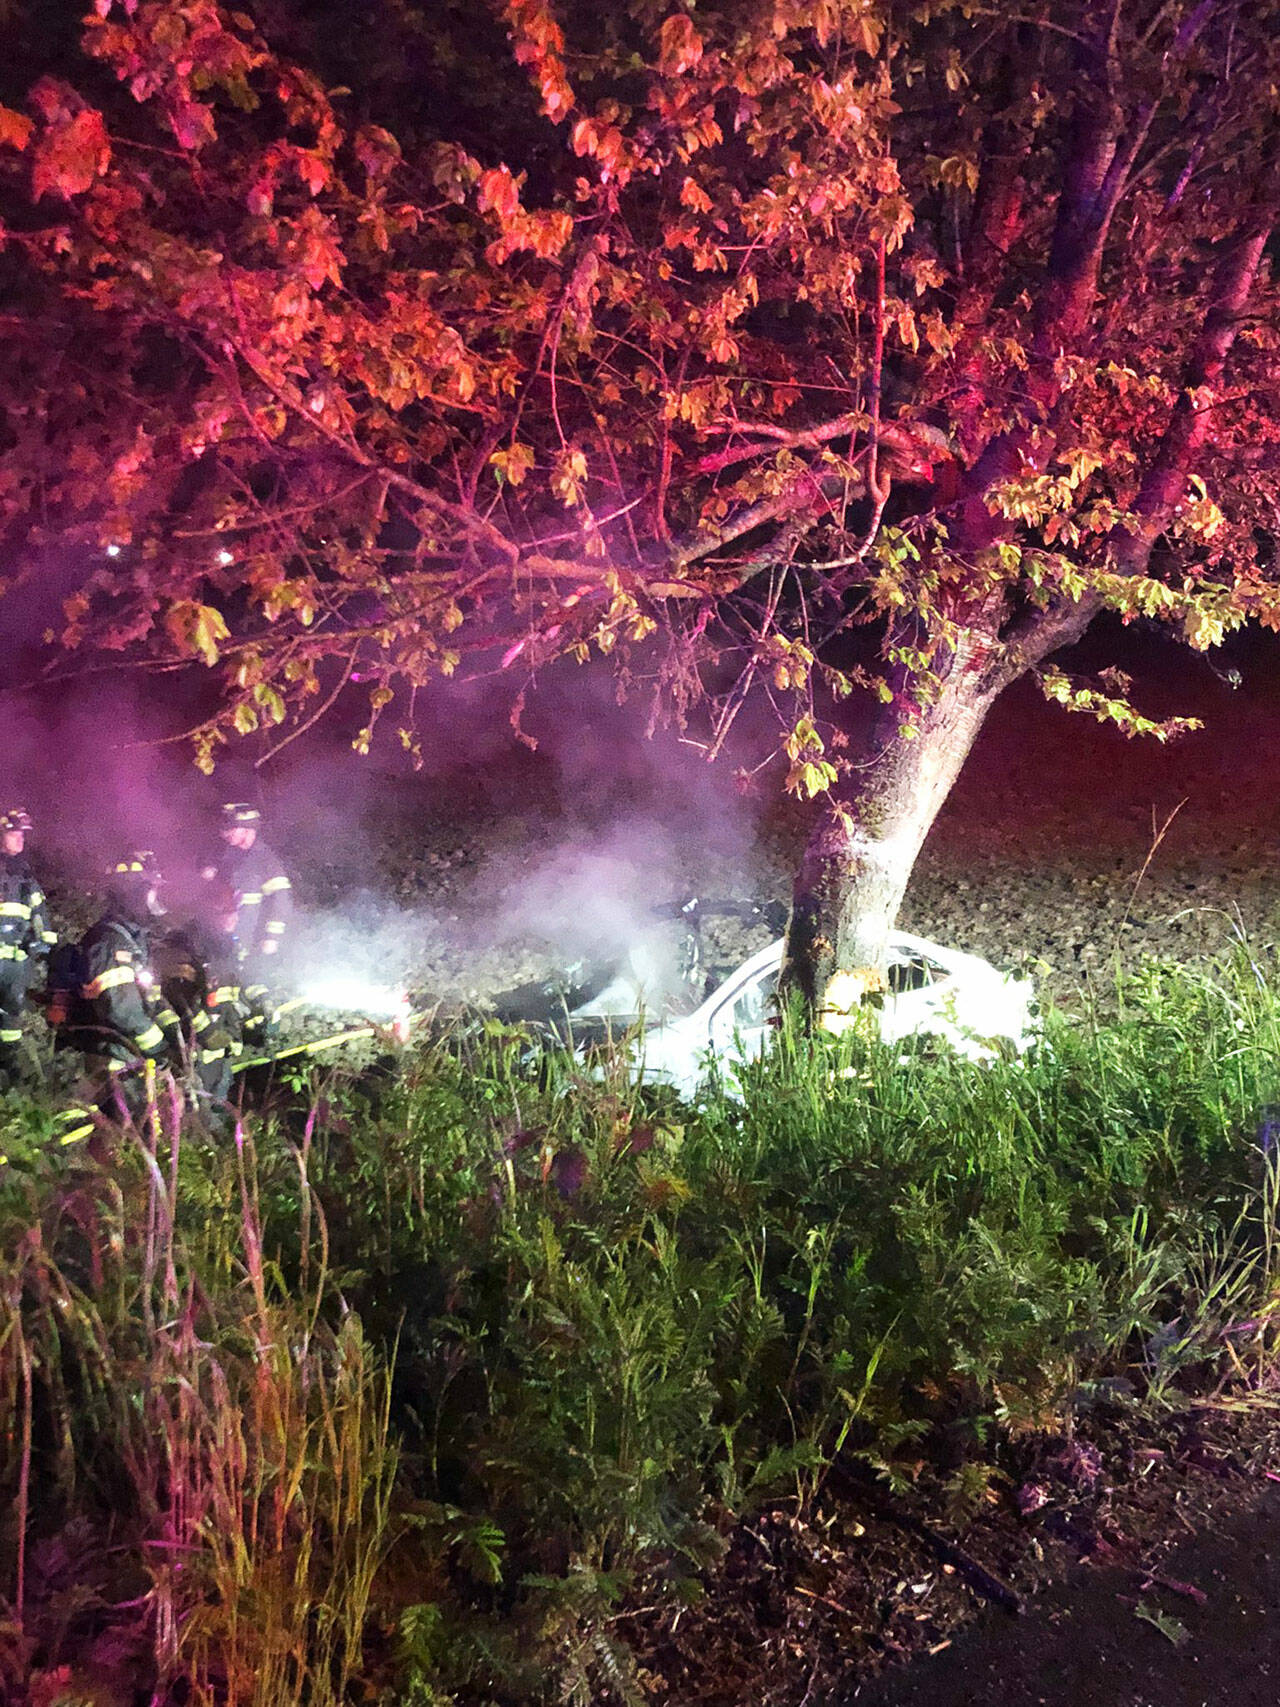 A person was killed when a car went off the road and crashed into a tree at about 3:19 a.m. Thursday, May 12 on the East Valley Highway near South 277th Street. COURTESY PHOTO, Puget Sound Fire